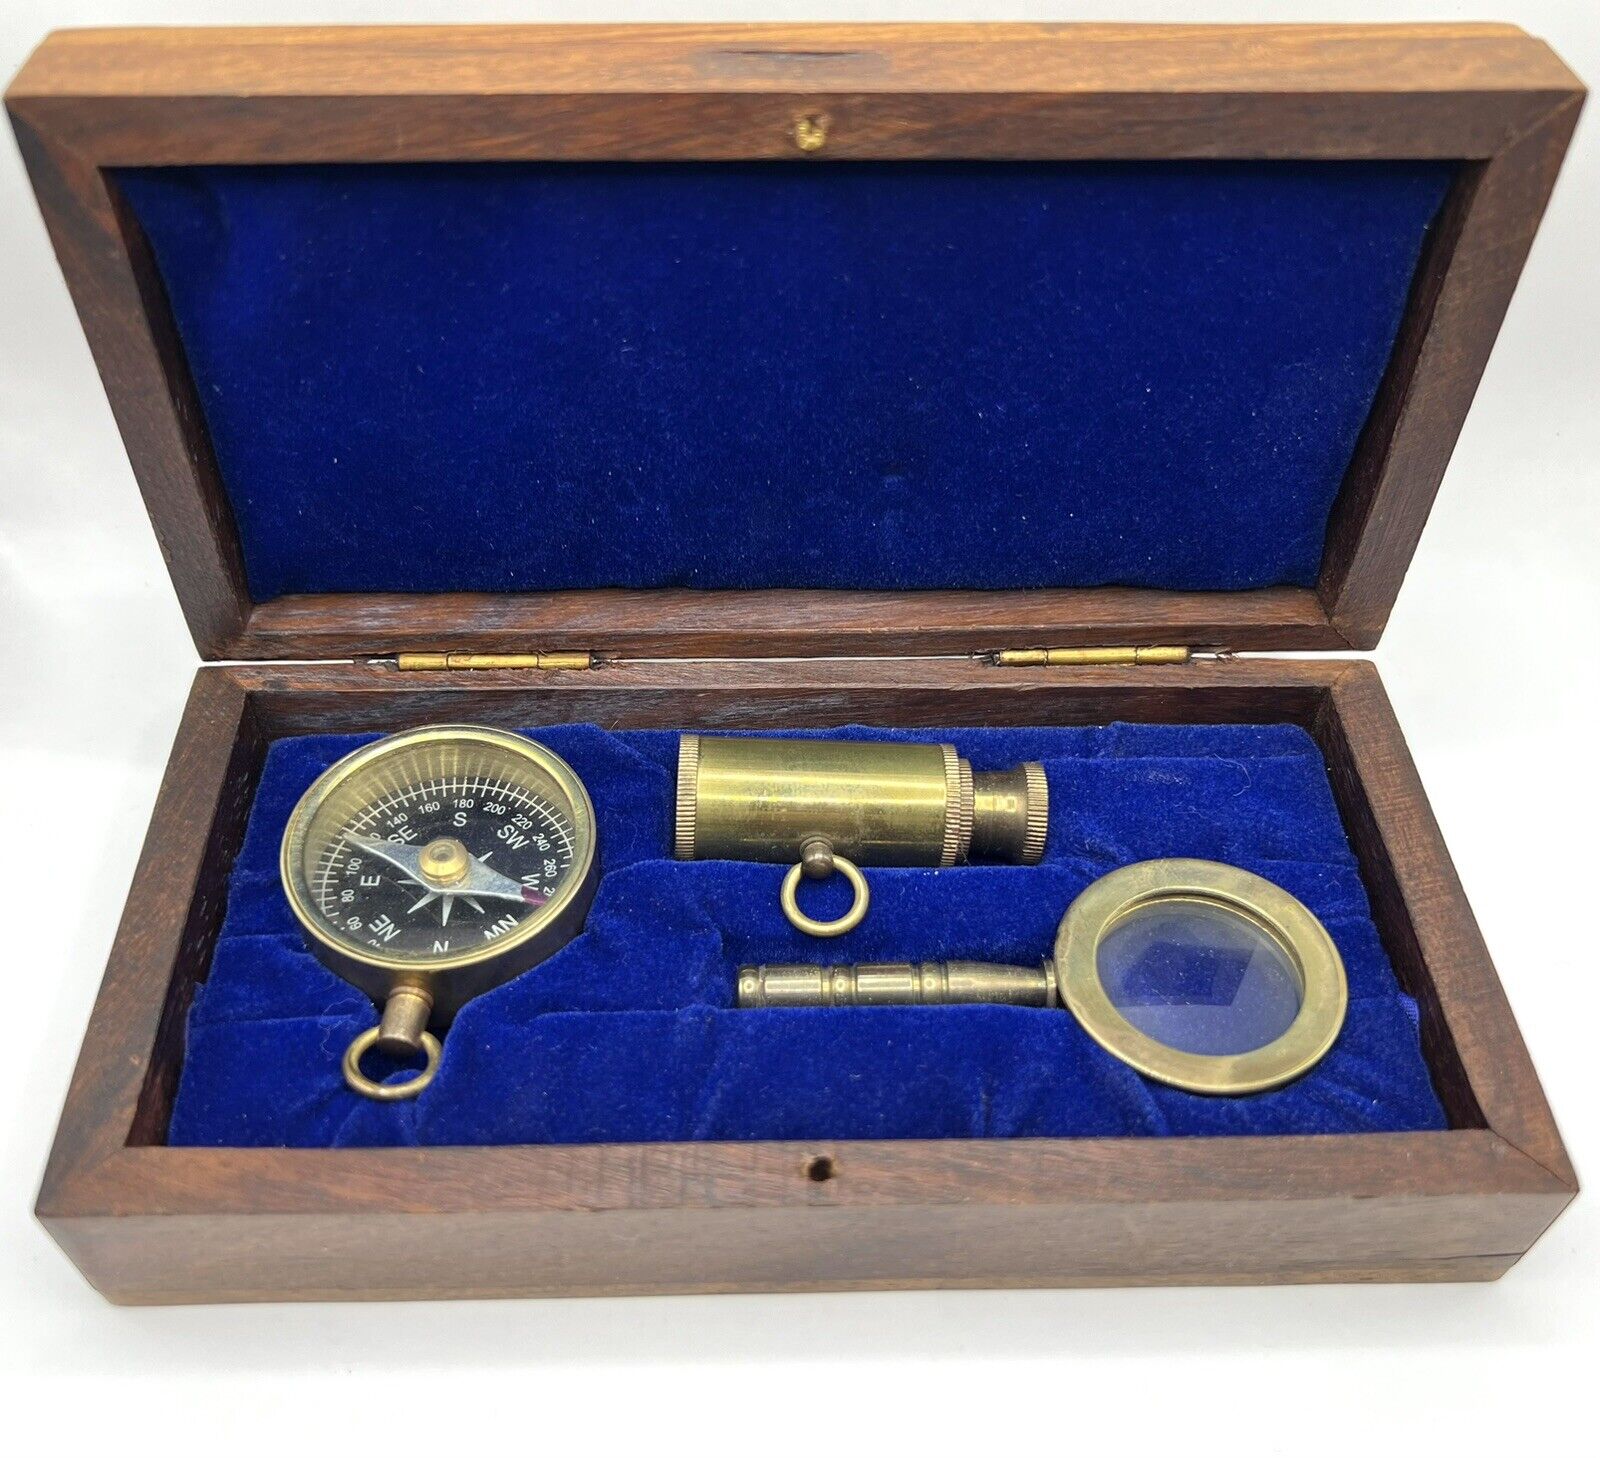 Brass Telescope Compass Magnifying Glass Navigation Boxed Set Surveying Nautical